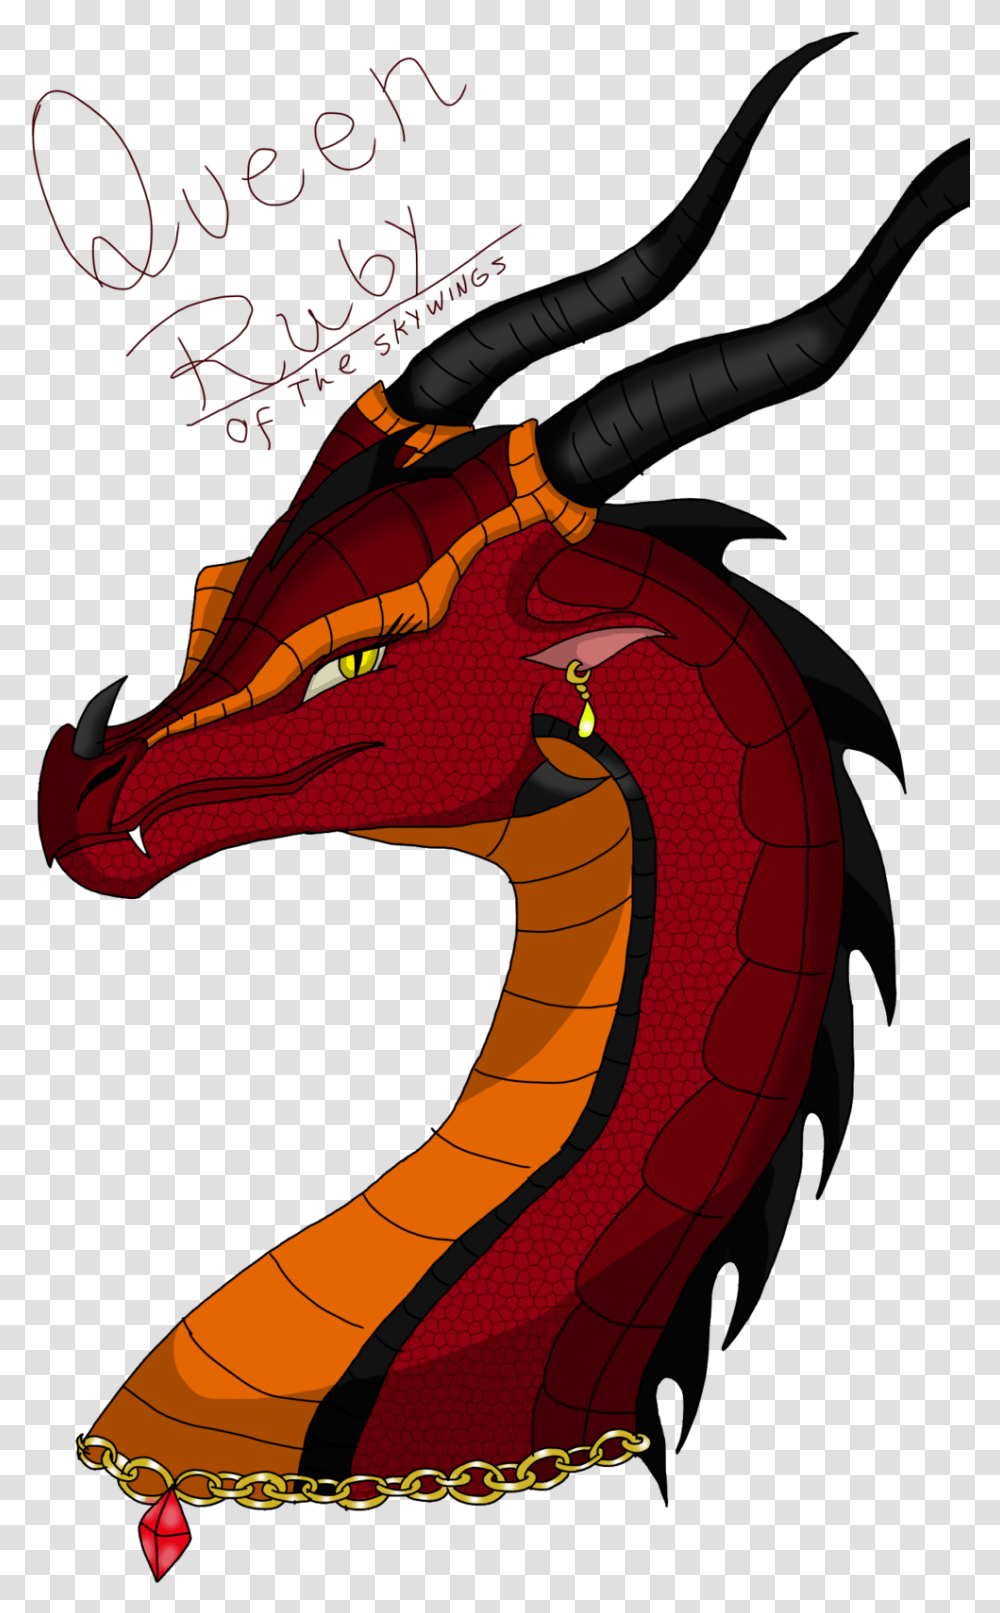 Wings Of Fire Queen Ruby Fanart, Dragon, Animal, Snake, Reptile Transparent Png